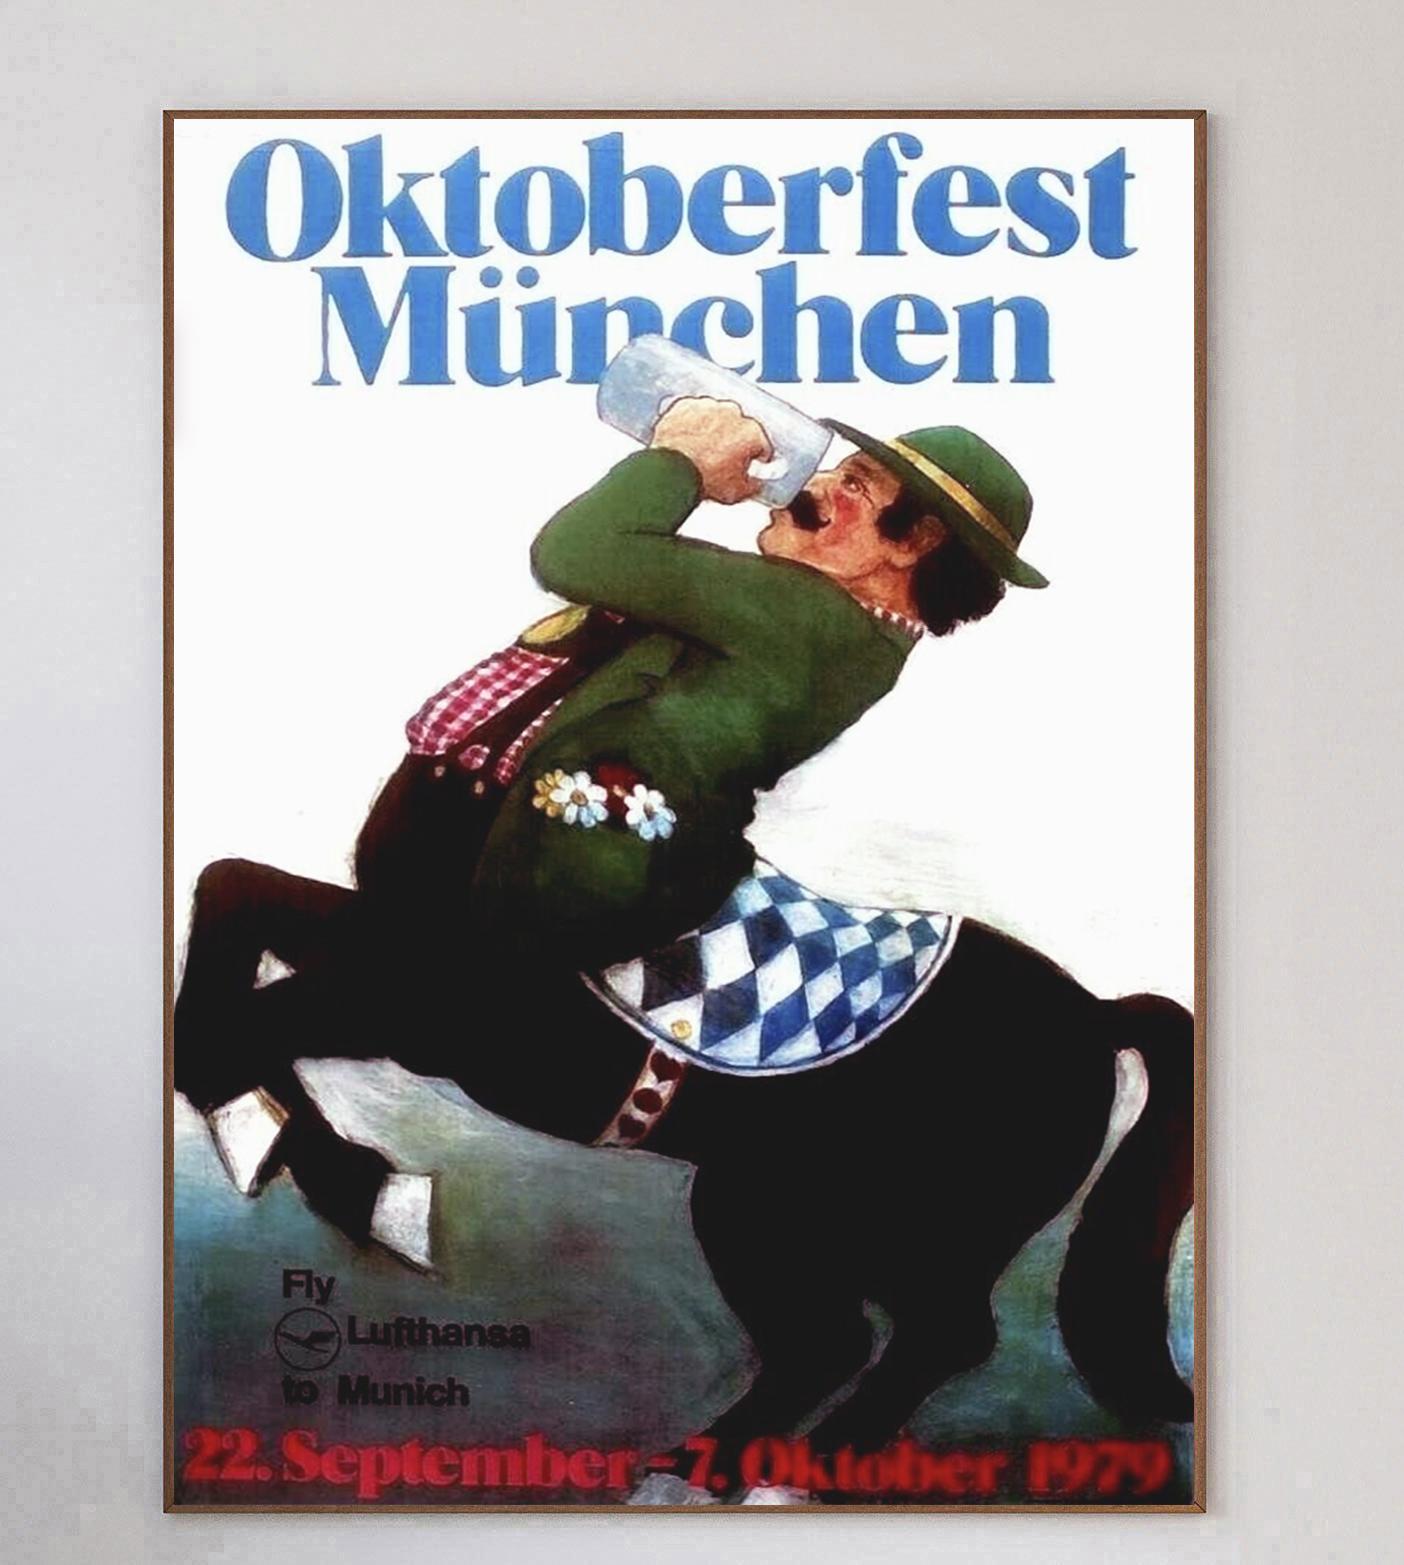 Wonderful poster depicting a centaur in traditional lederhosen drinking a beer, promoting the 1979 Oktoberfest Munchen, or Munich Octoberfest. Held between 22nd September to 7 October 1979, the annual event is the largest Volksfest in the world and